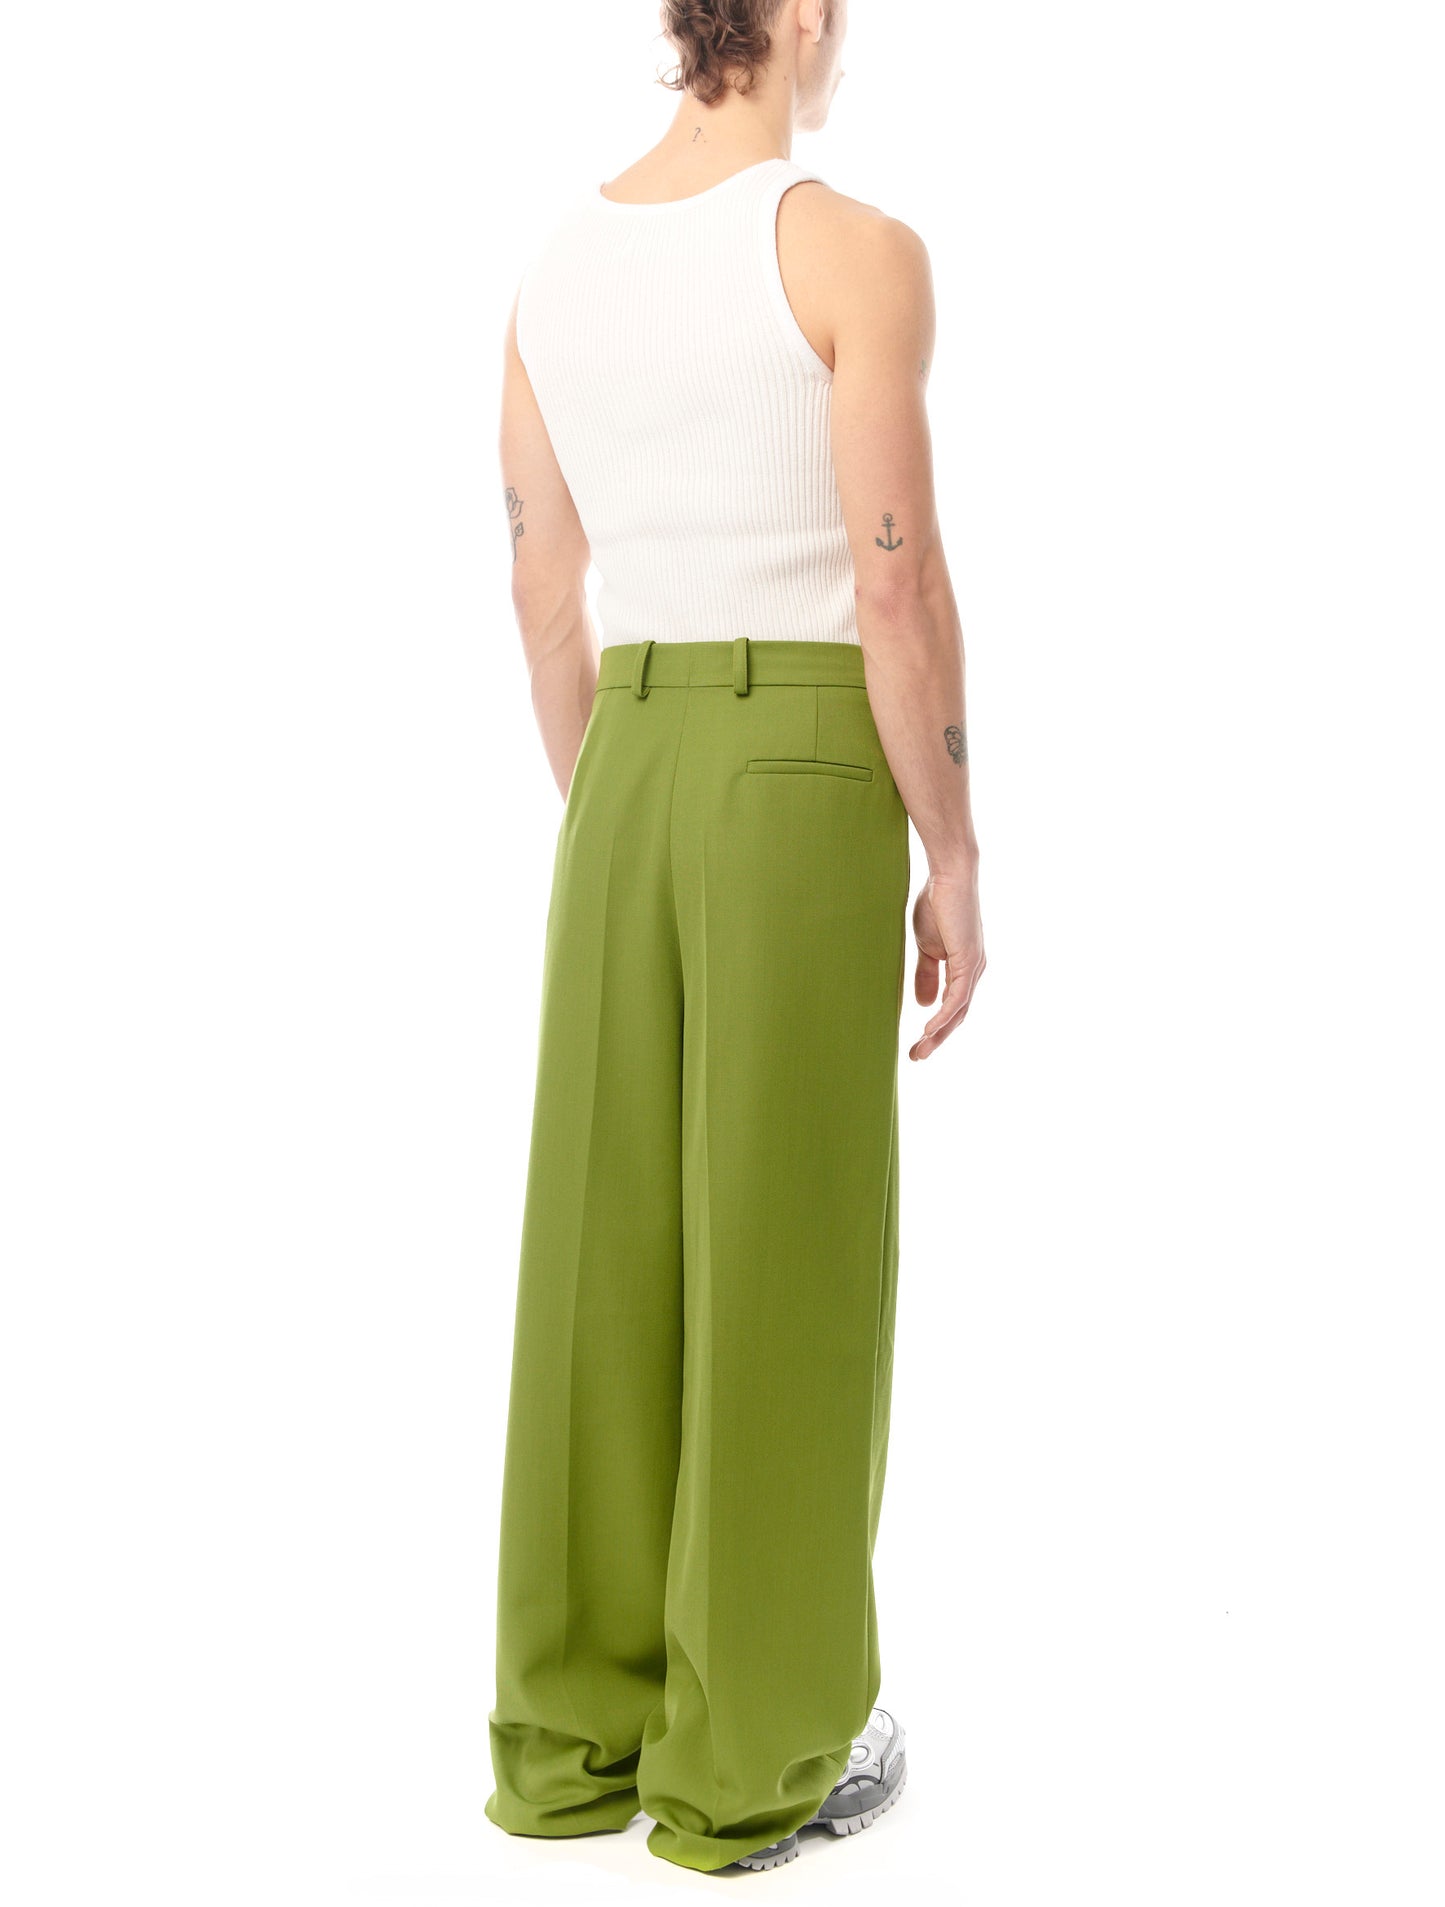 Botter Green Classic Unisex Trousers